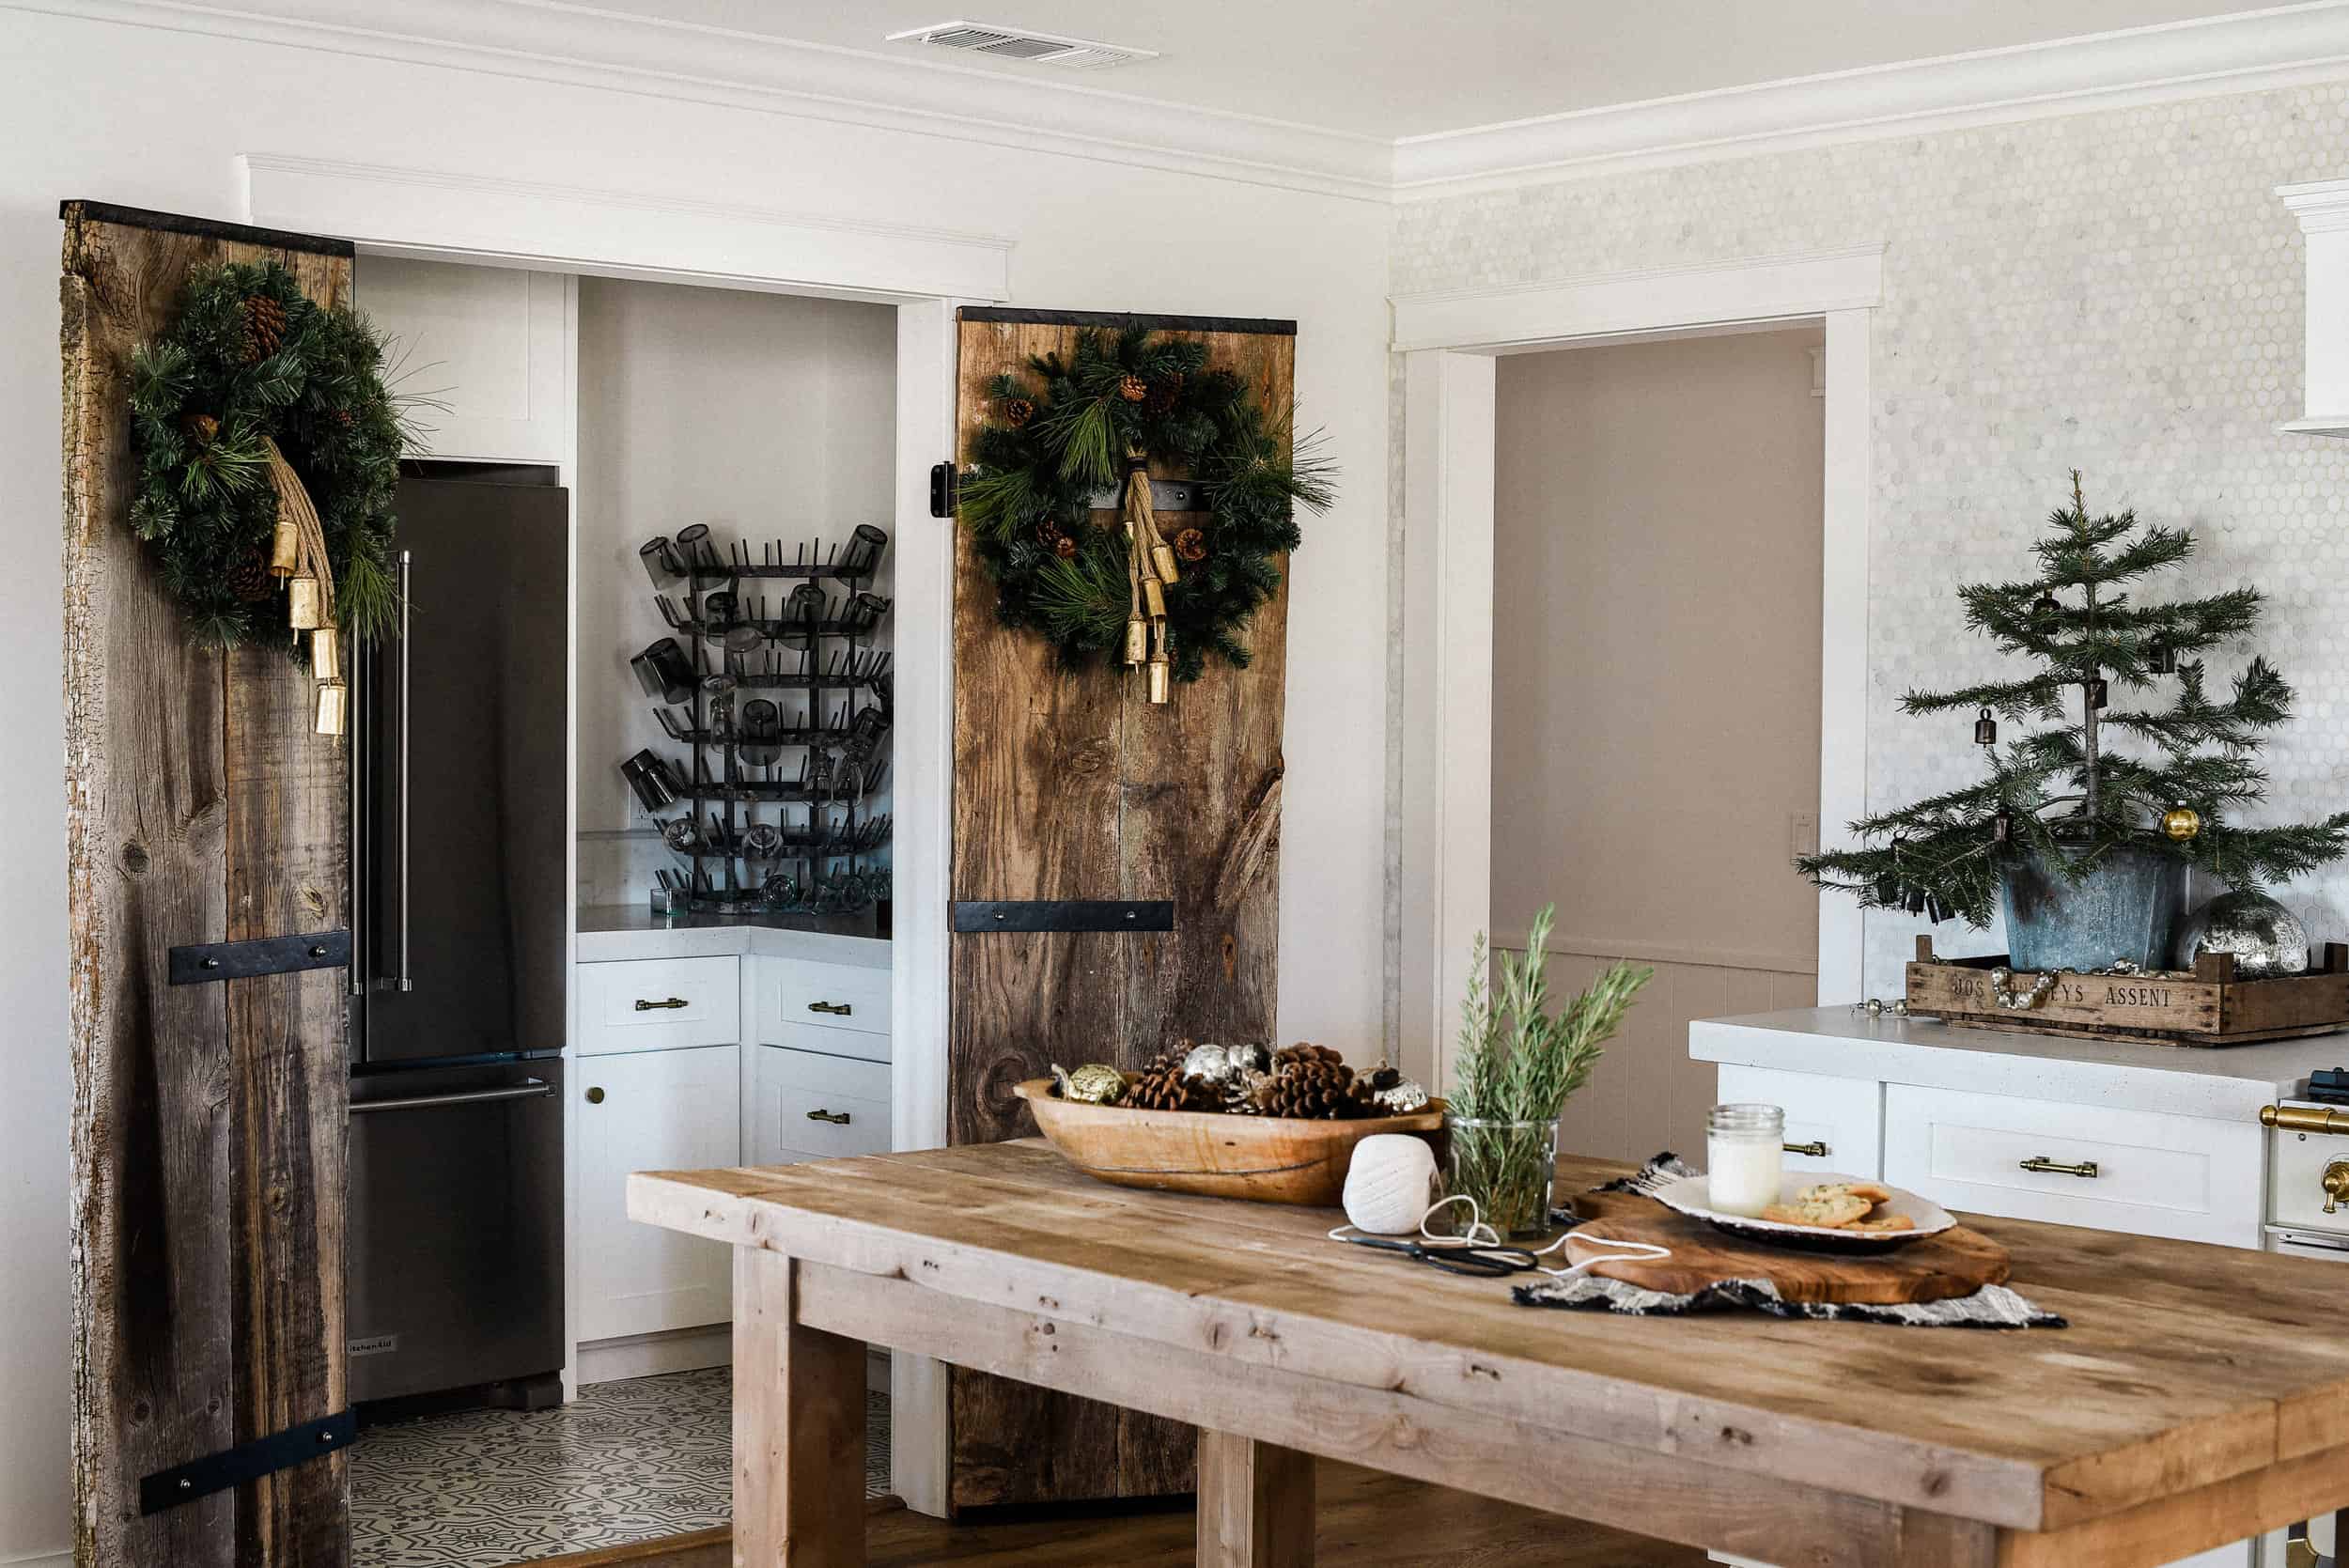 Tour our Christmas kitchen to gather ideas for decorating for the holidays this year! Use greenery and vintage touches to keep things simple and cohesive!